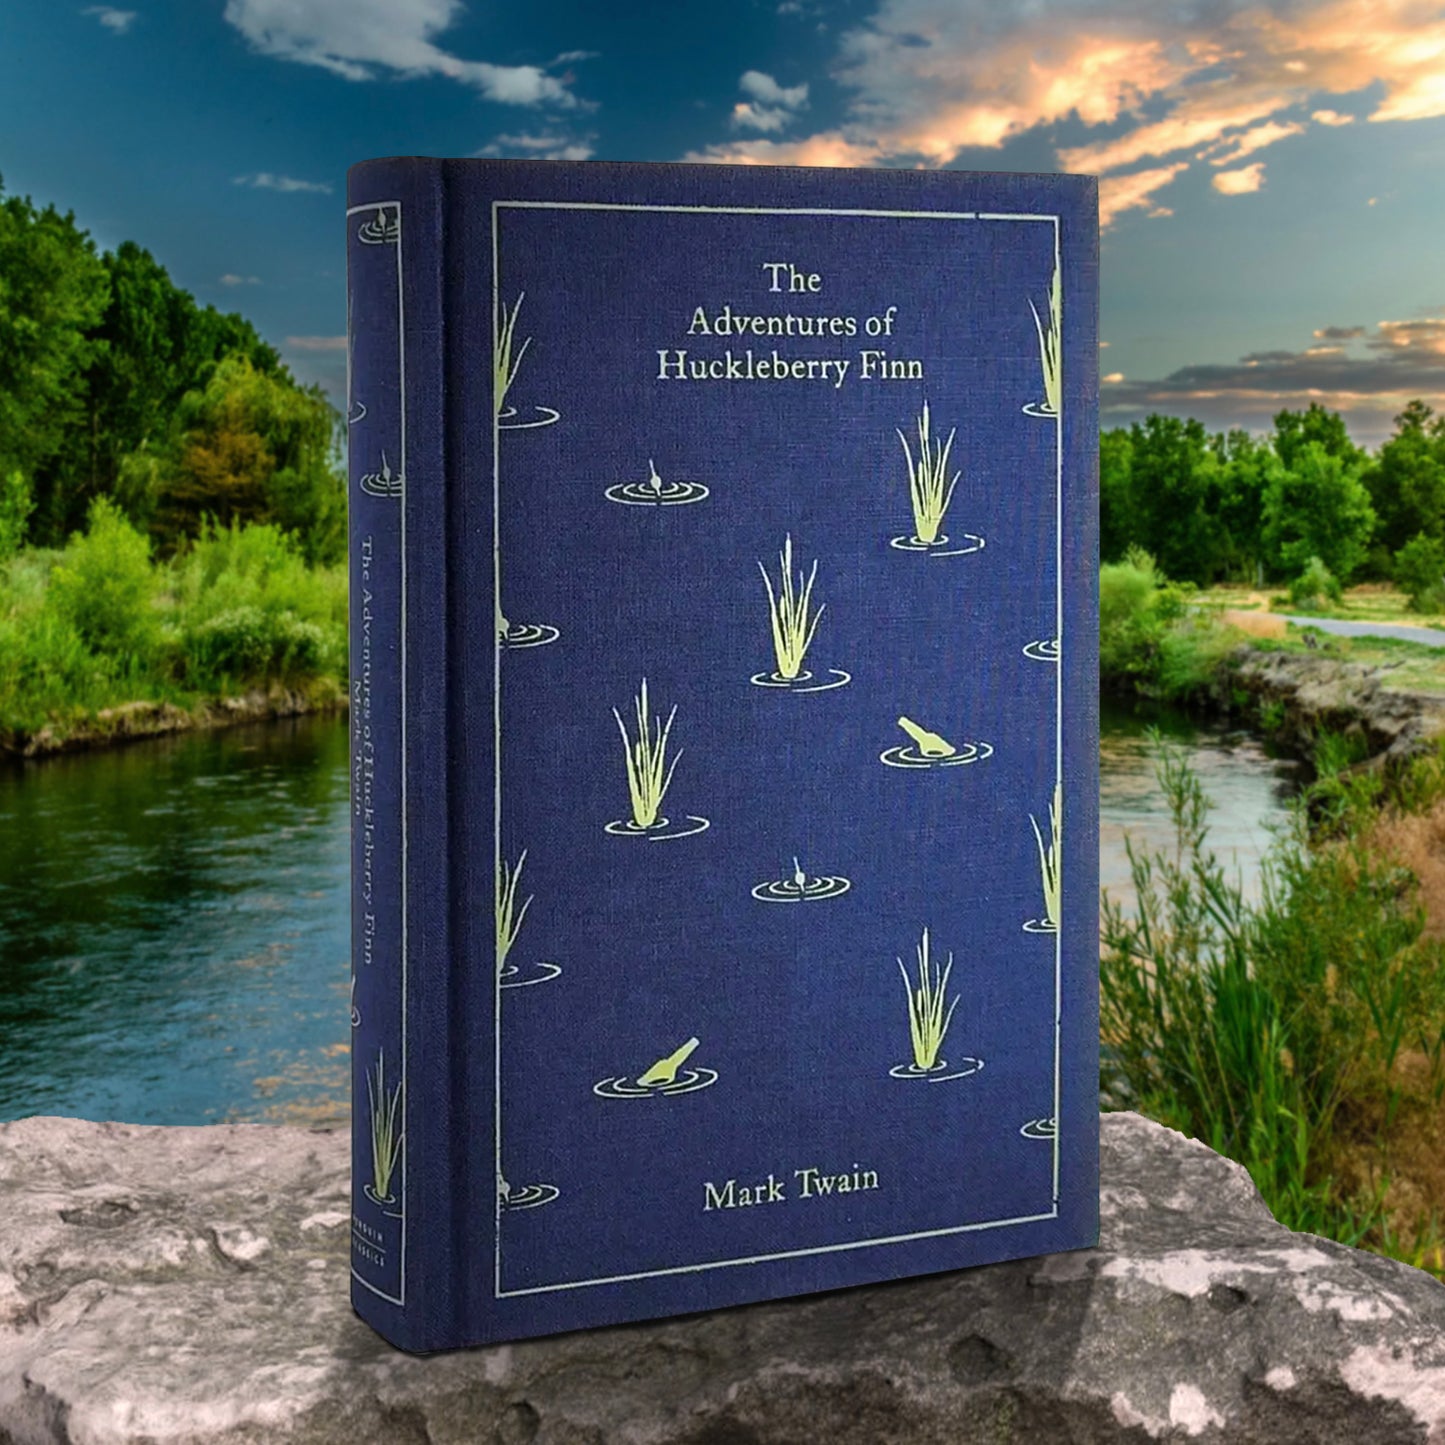 A blue book standing on a rock, in front of a river. On the cover are yellow drawings of river grass and glass bottles floating in the water. Yellow text says "The Adventures of Huckleberry Fin, Mark Twain."